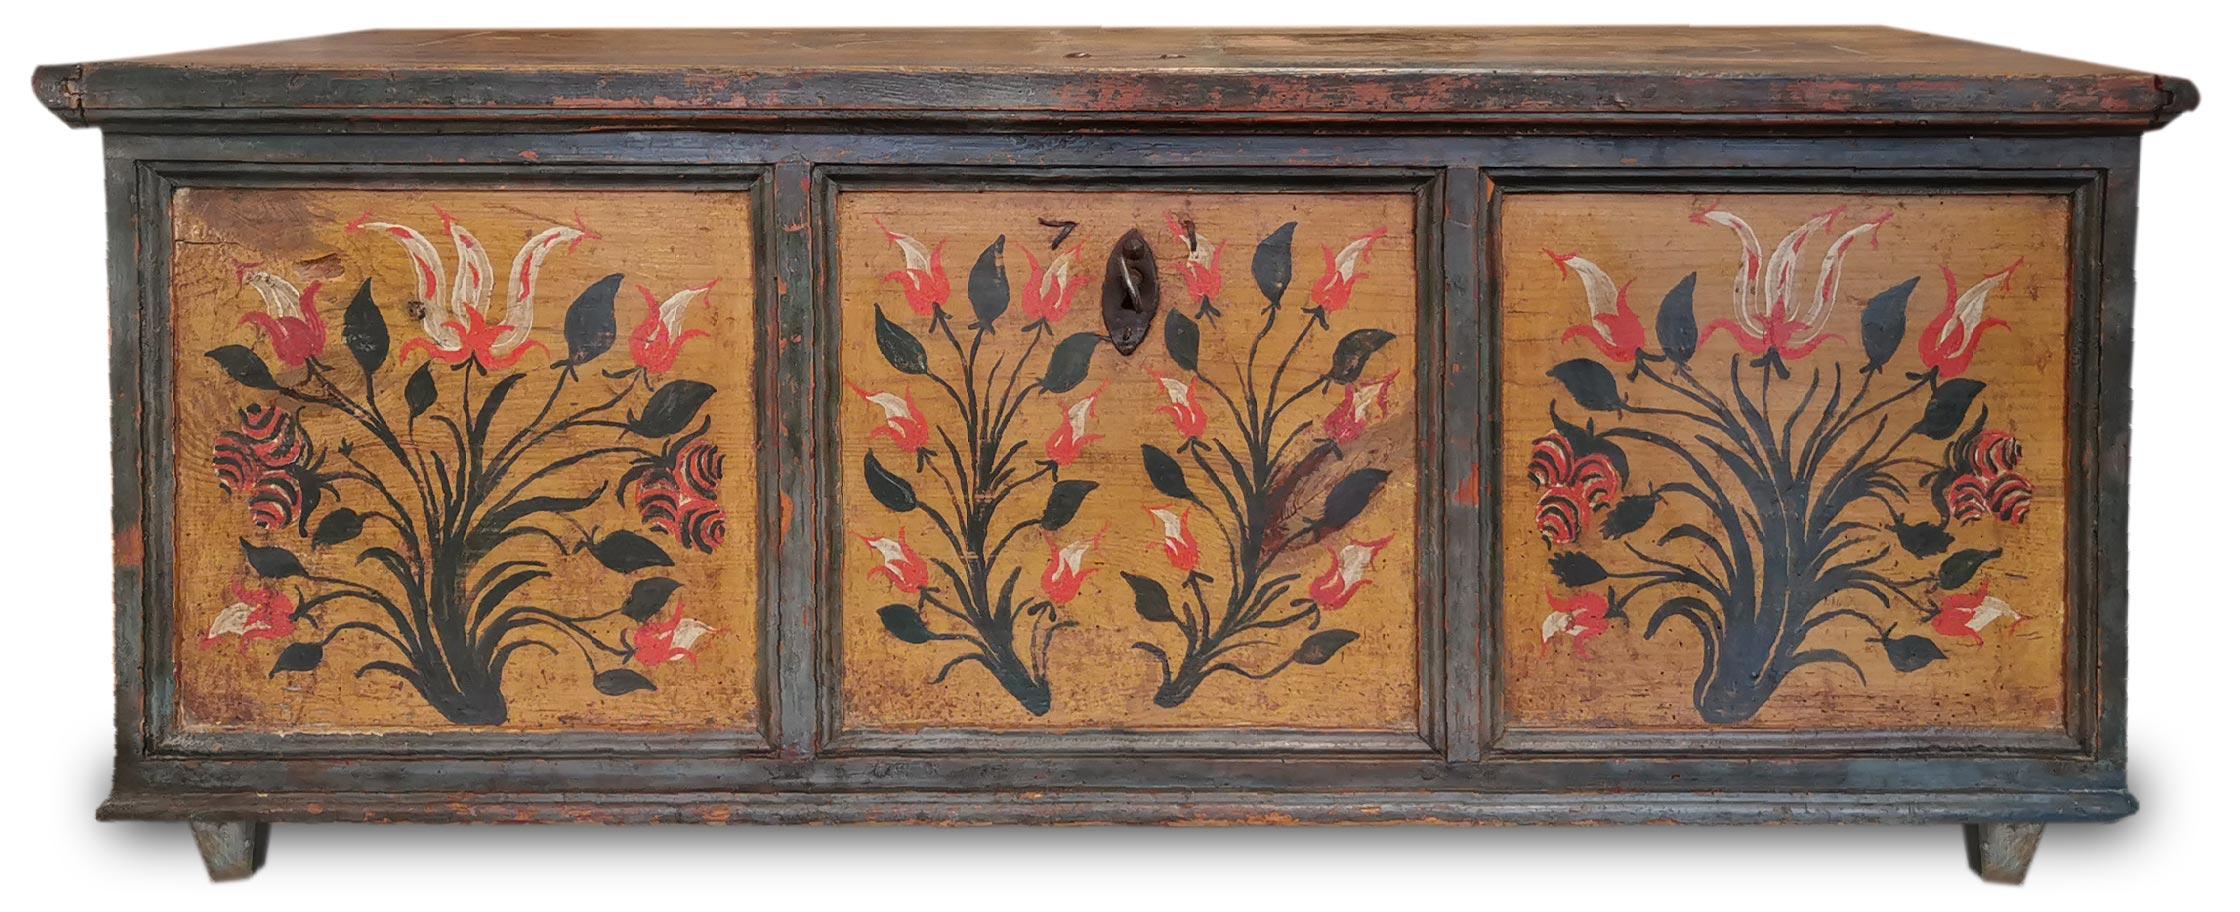 Dark Green Floral Painted Blanket Chest Early 19th Century 8